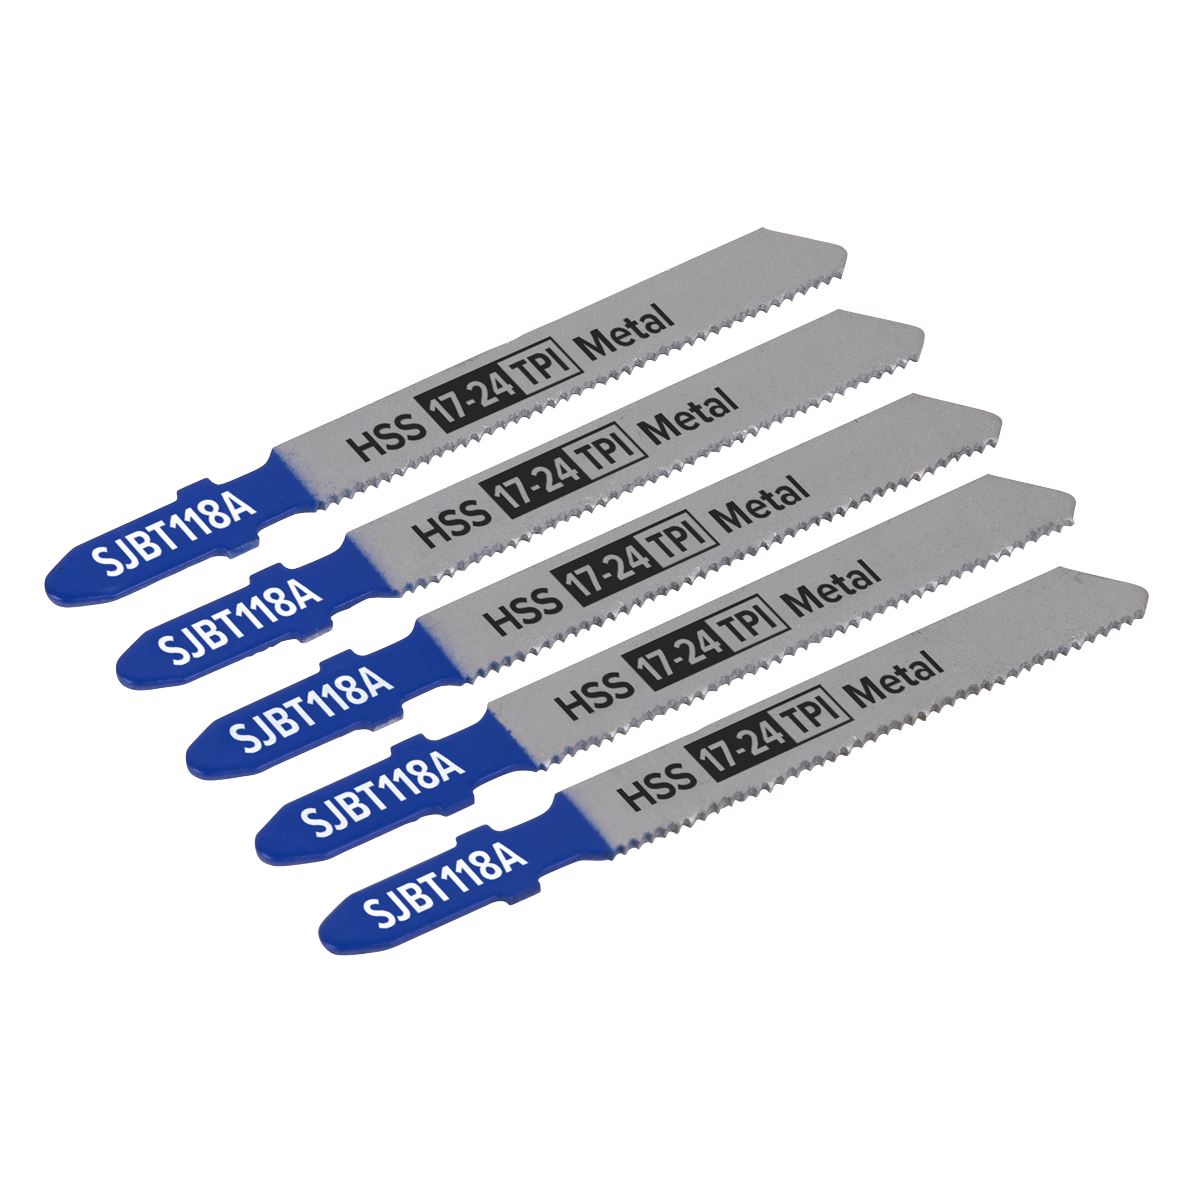 Sealey Jigsaw Blade Metal 92mm 17-24tpi - Pack of 5